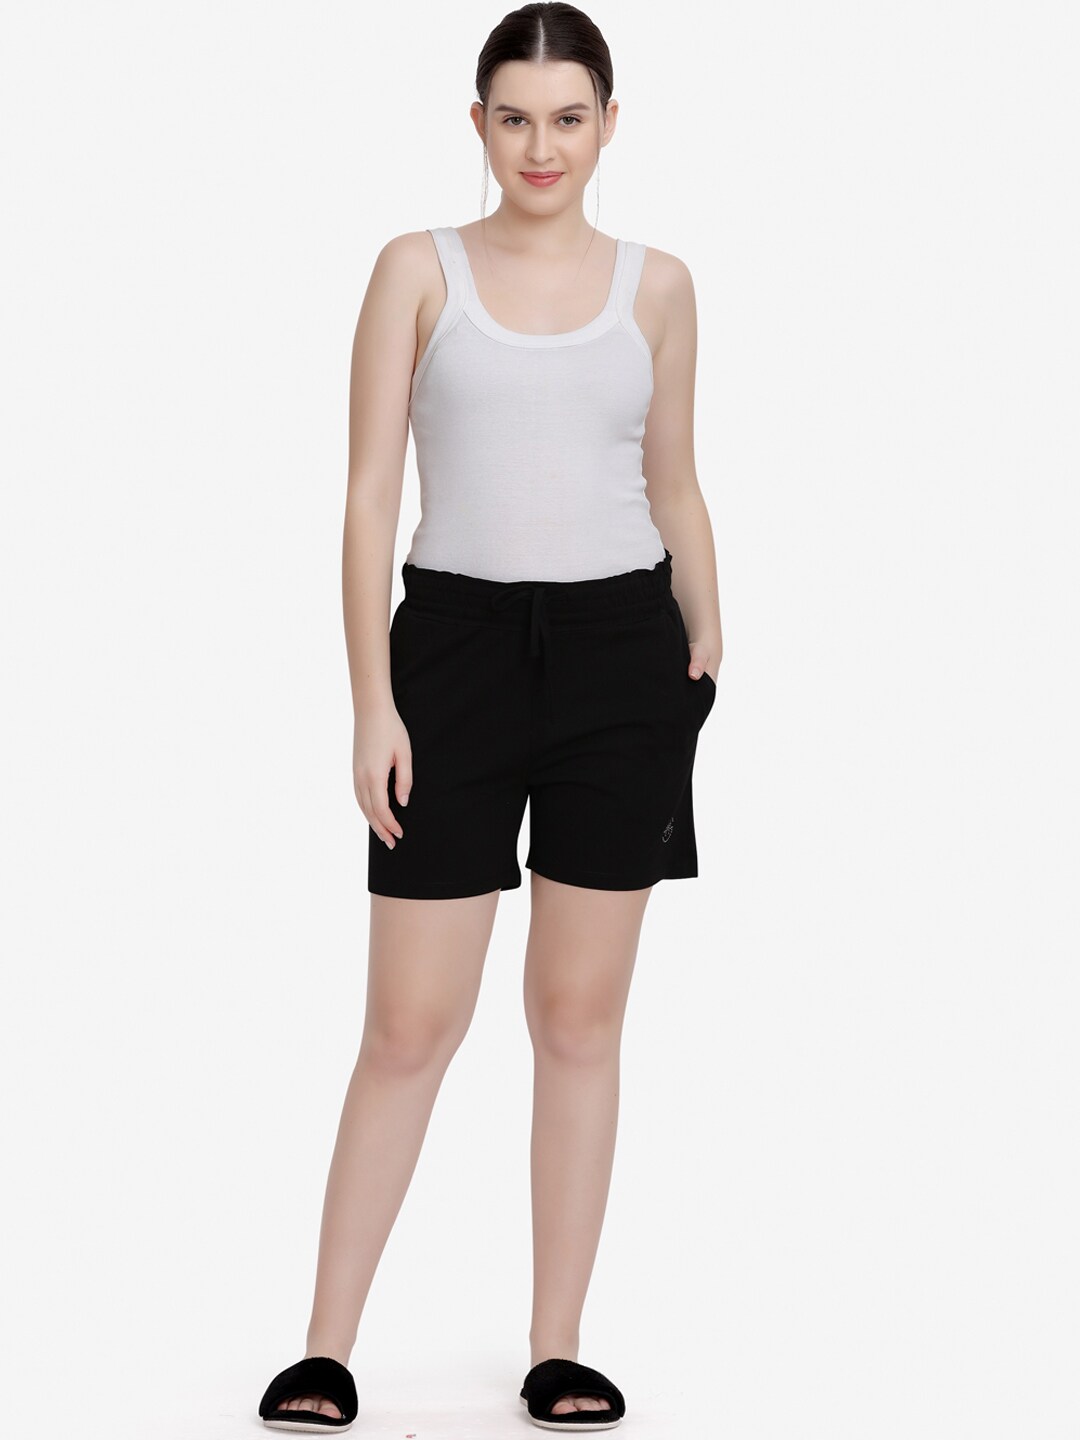 MAYSIXTY Women Black Slim Fit Cotton Shorts Price in India